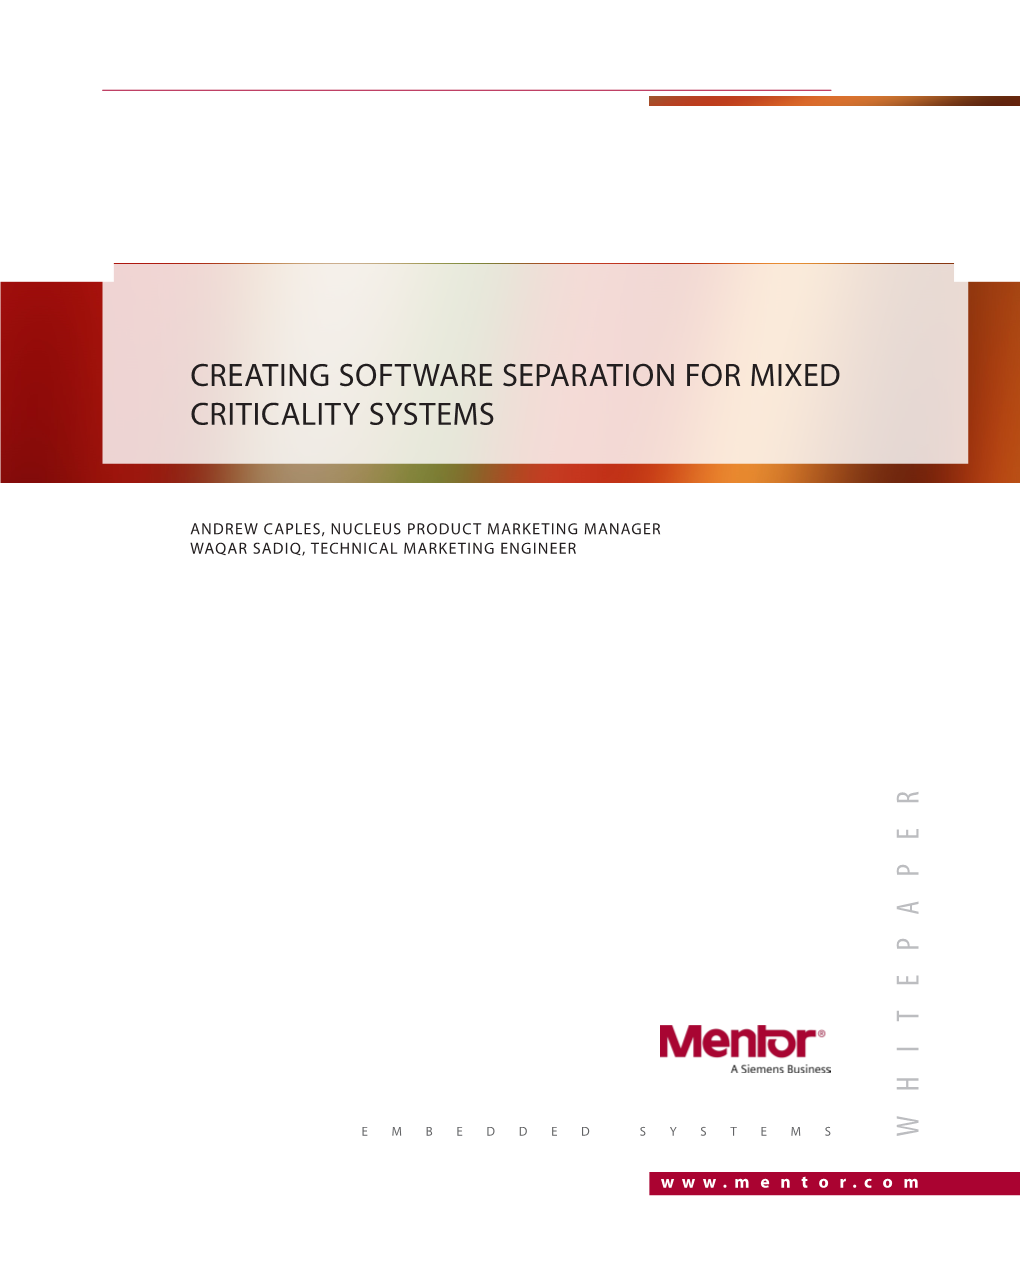 Creating Software Separation for Mixed Criticality Systems